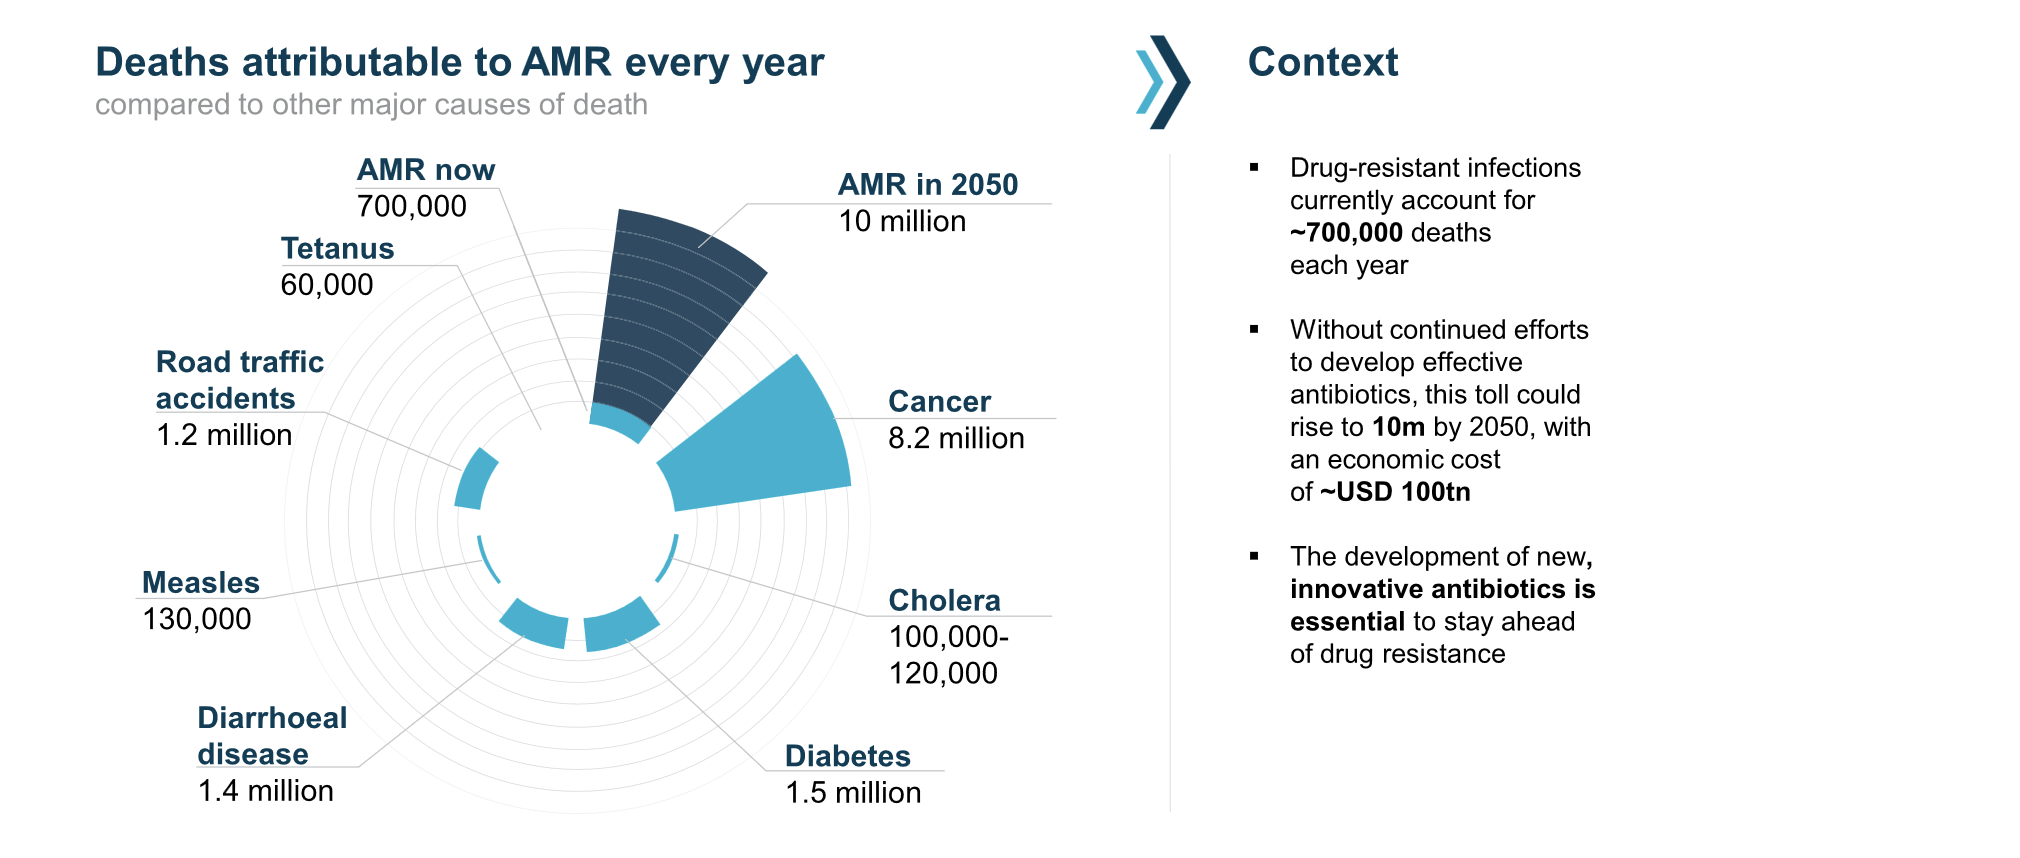 Deaths attributed to AMR every year